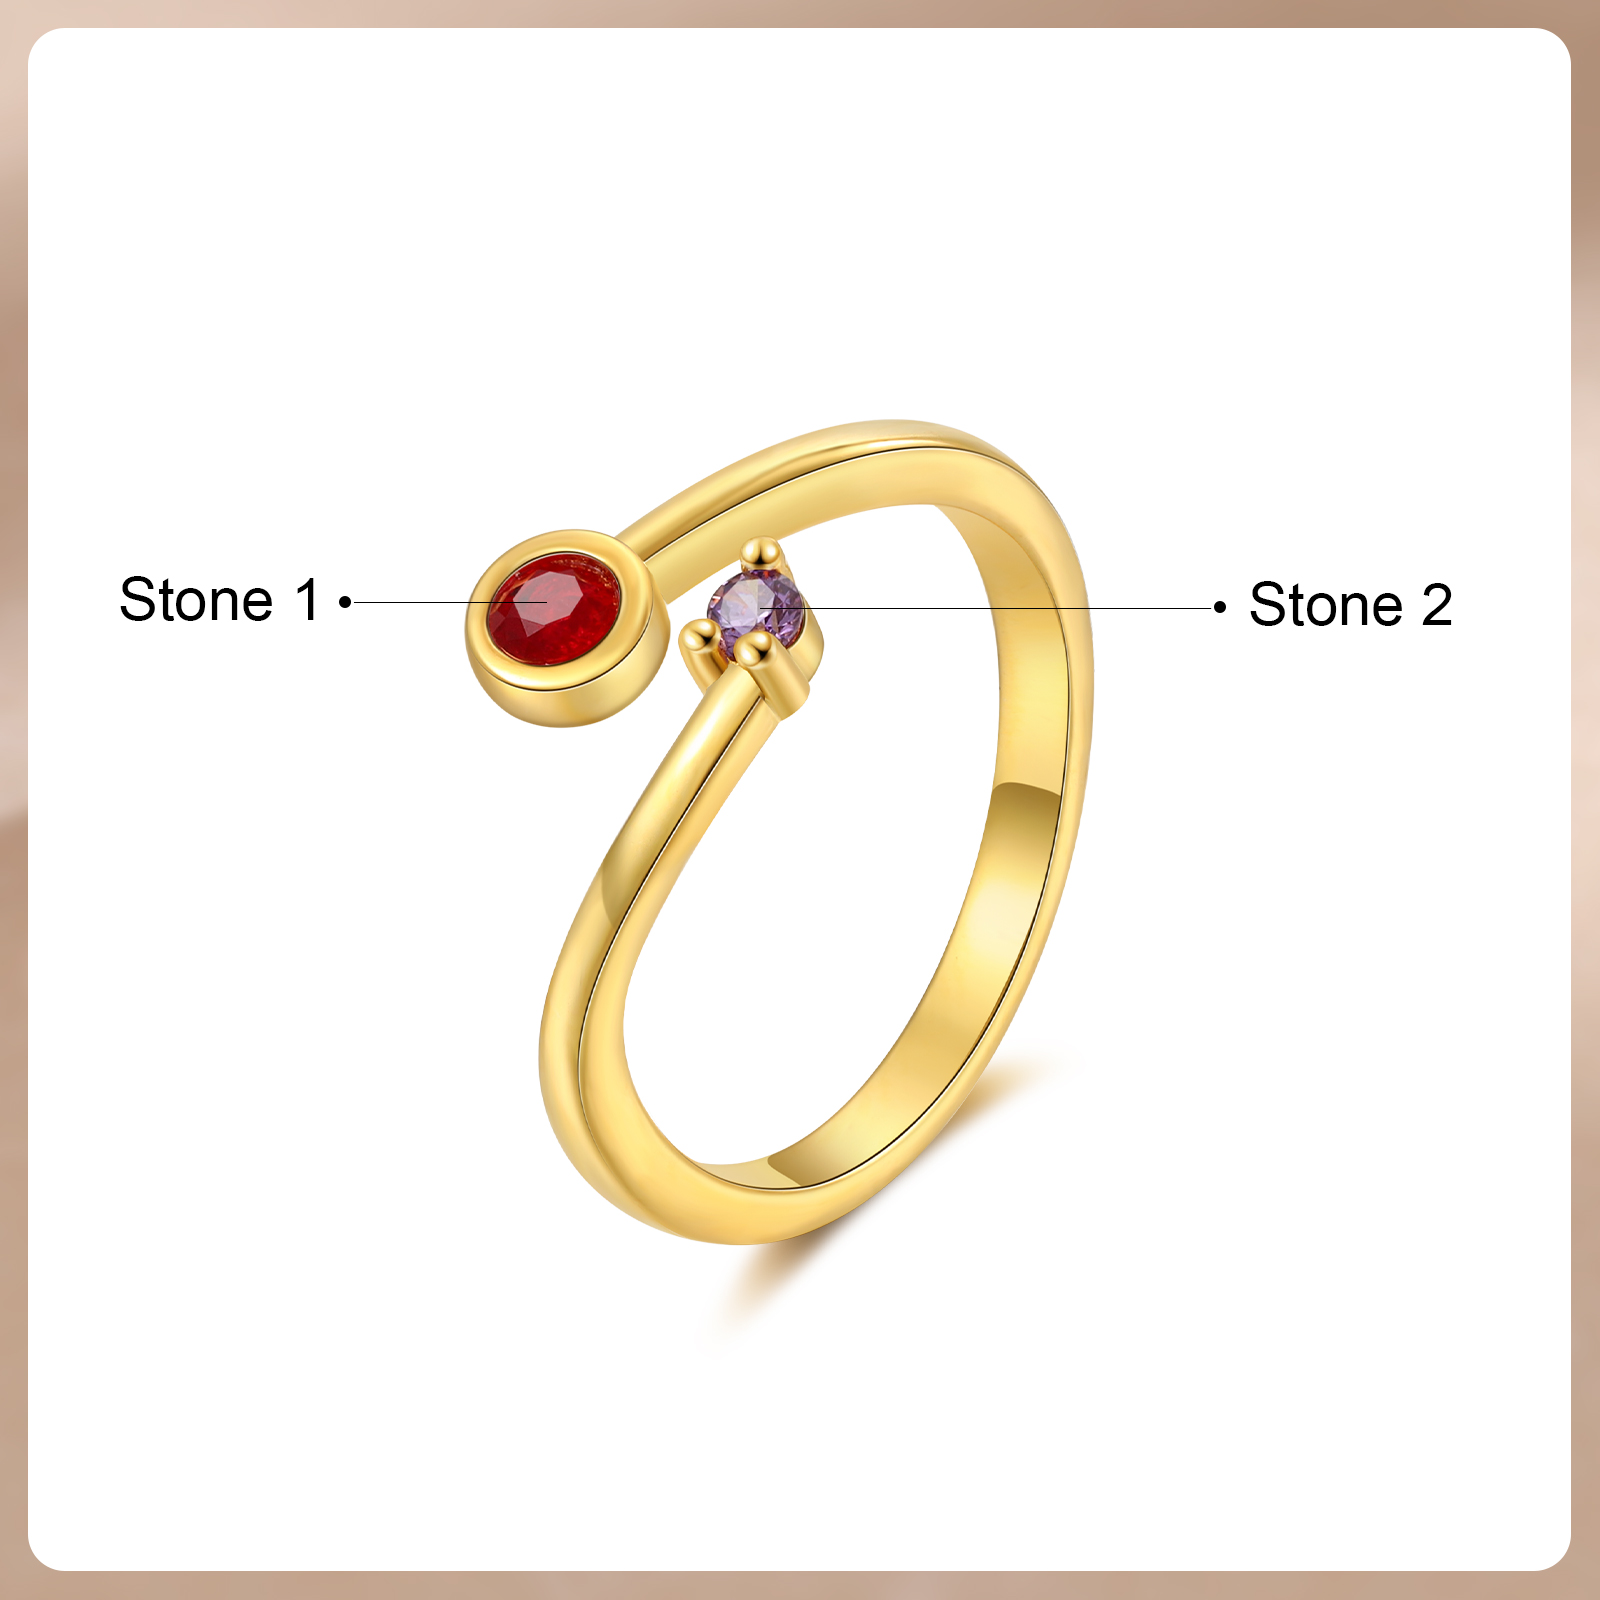 2 Birthstones - Personalized Birthstone Ring, A Customized Gift For Her